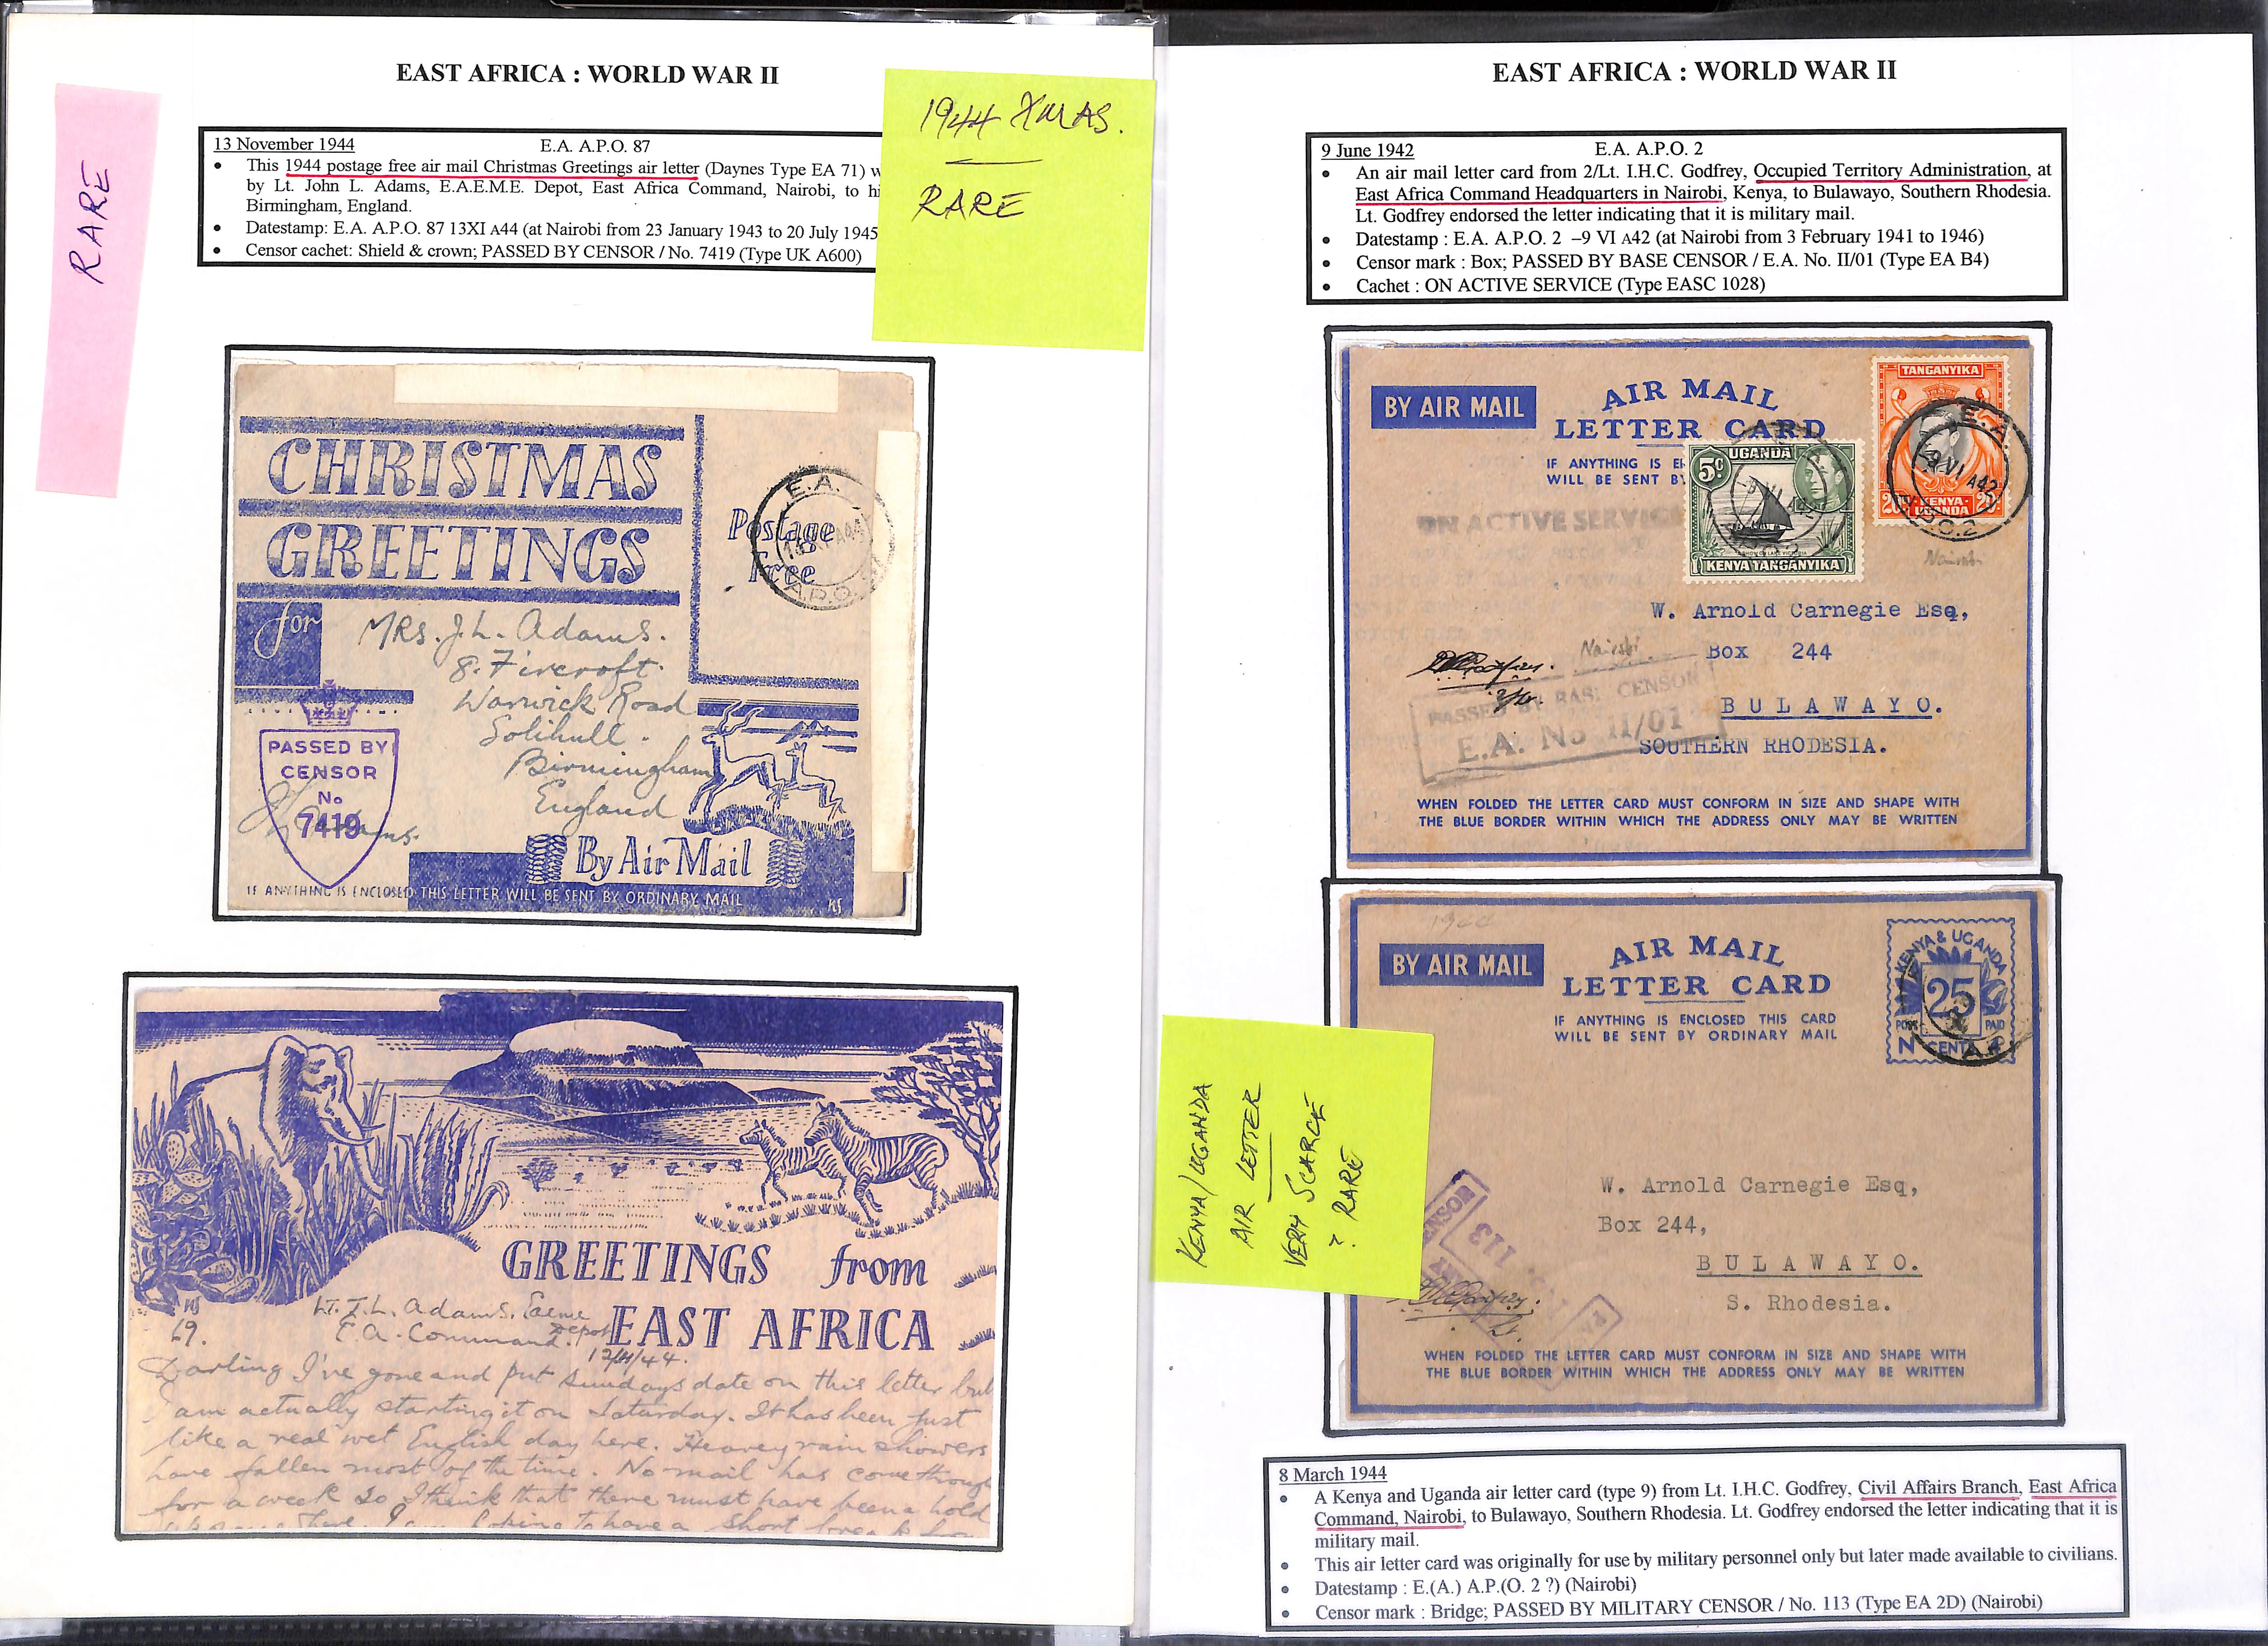 1942-45 Air letters including Christmas Greetings types for 1943 or 1944, East African or U.D.F